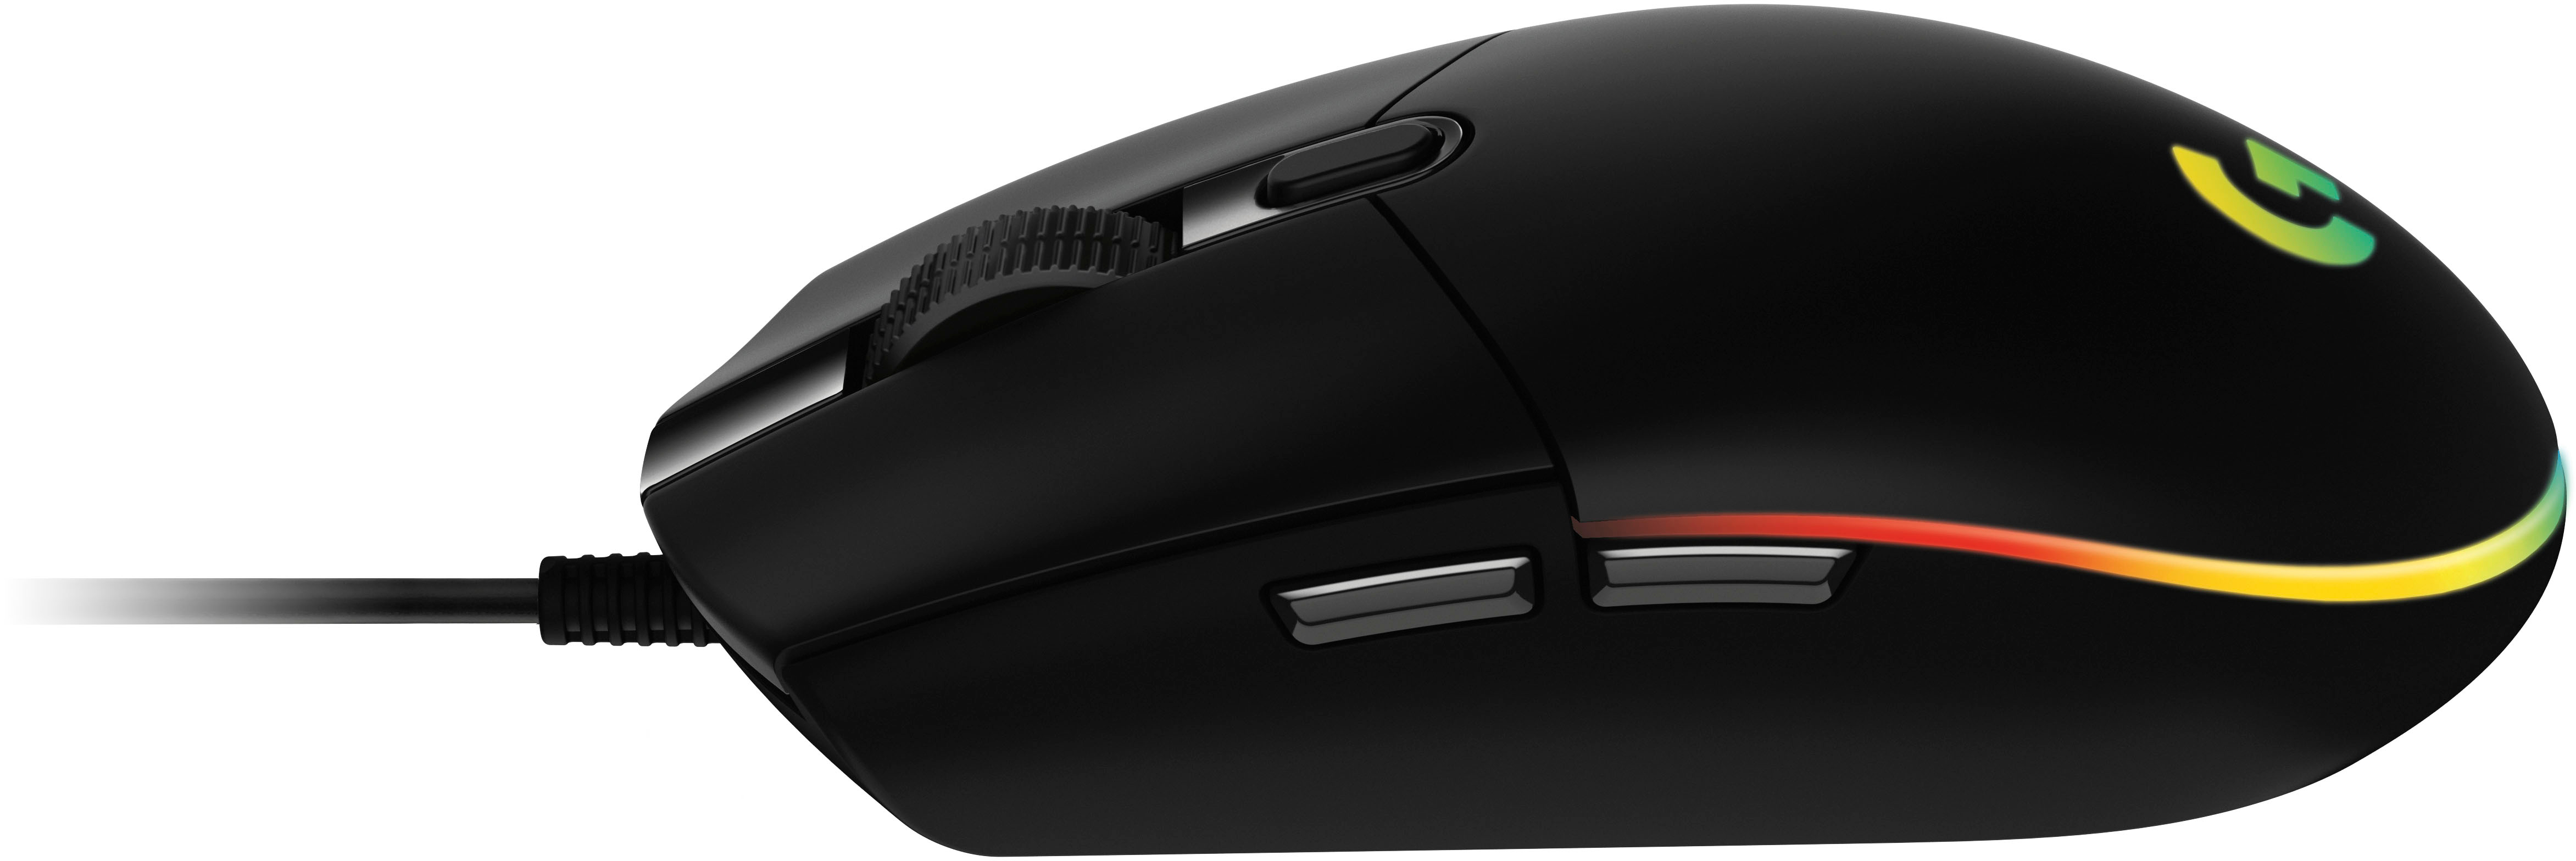 Logitech - G203 LIGHTSYNC Wired Optical Gaming Mouse with 8,000 DPI sensor  - Black